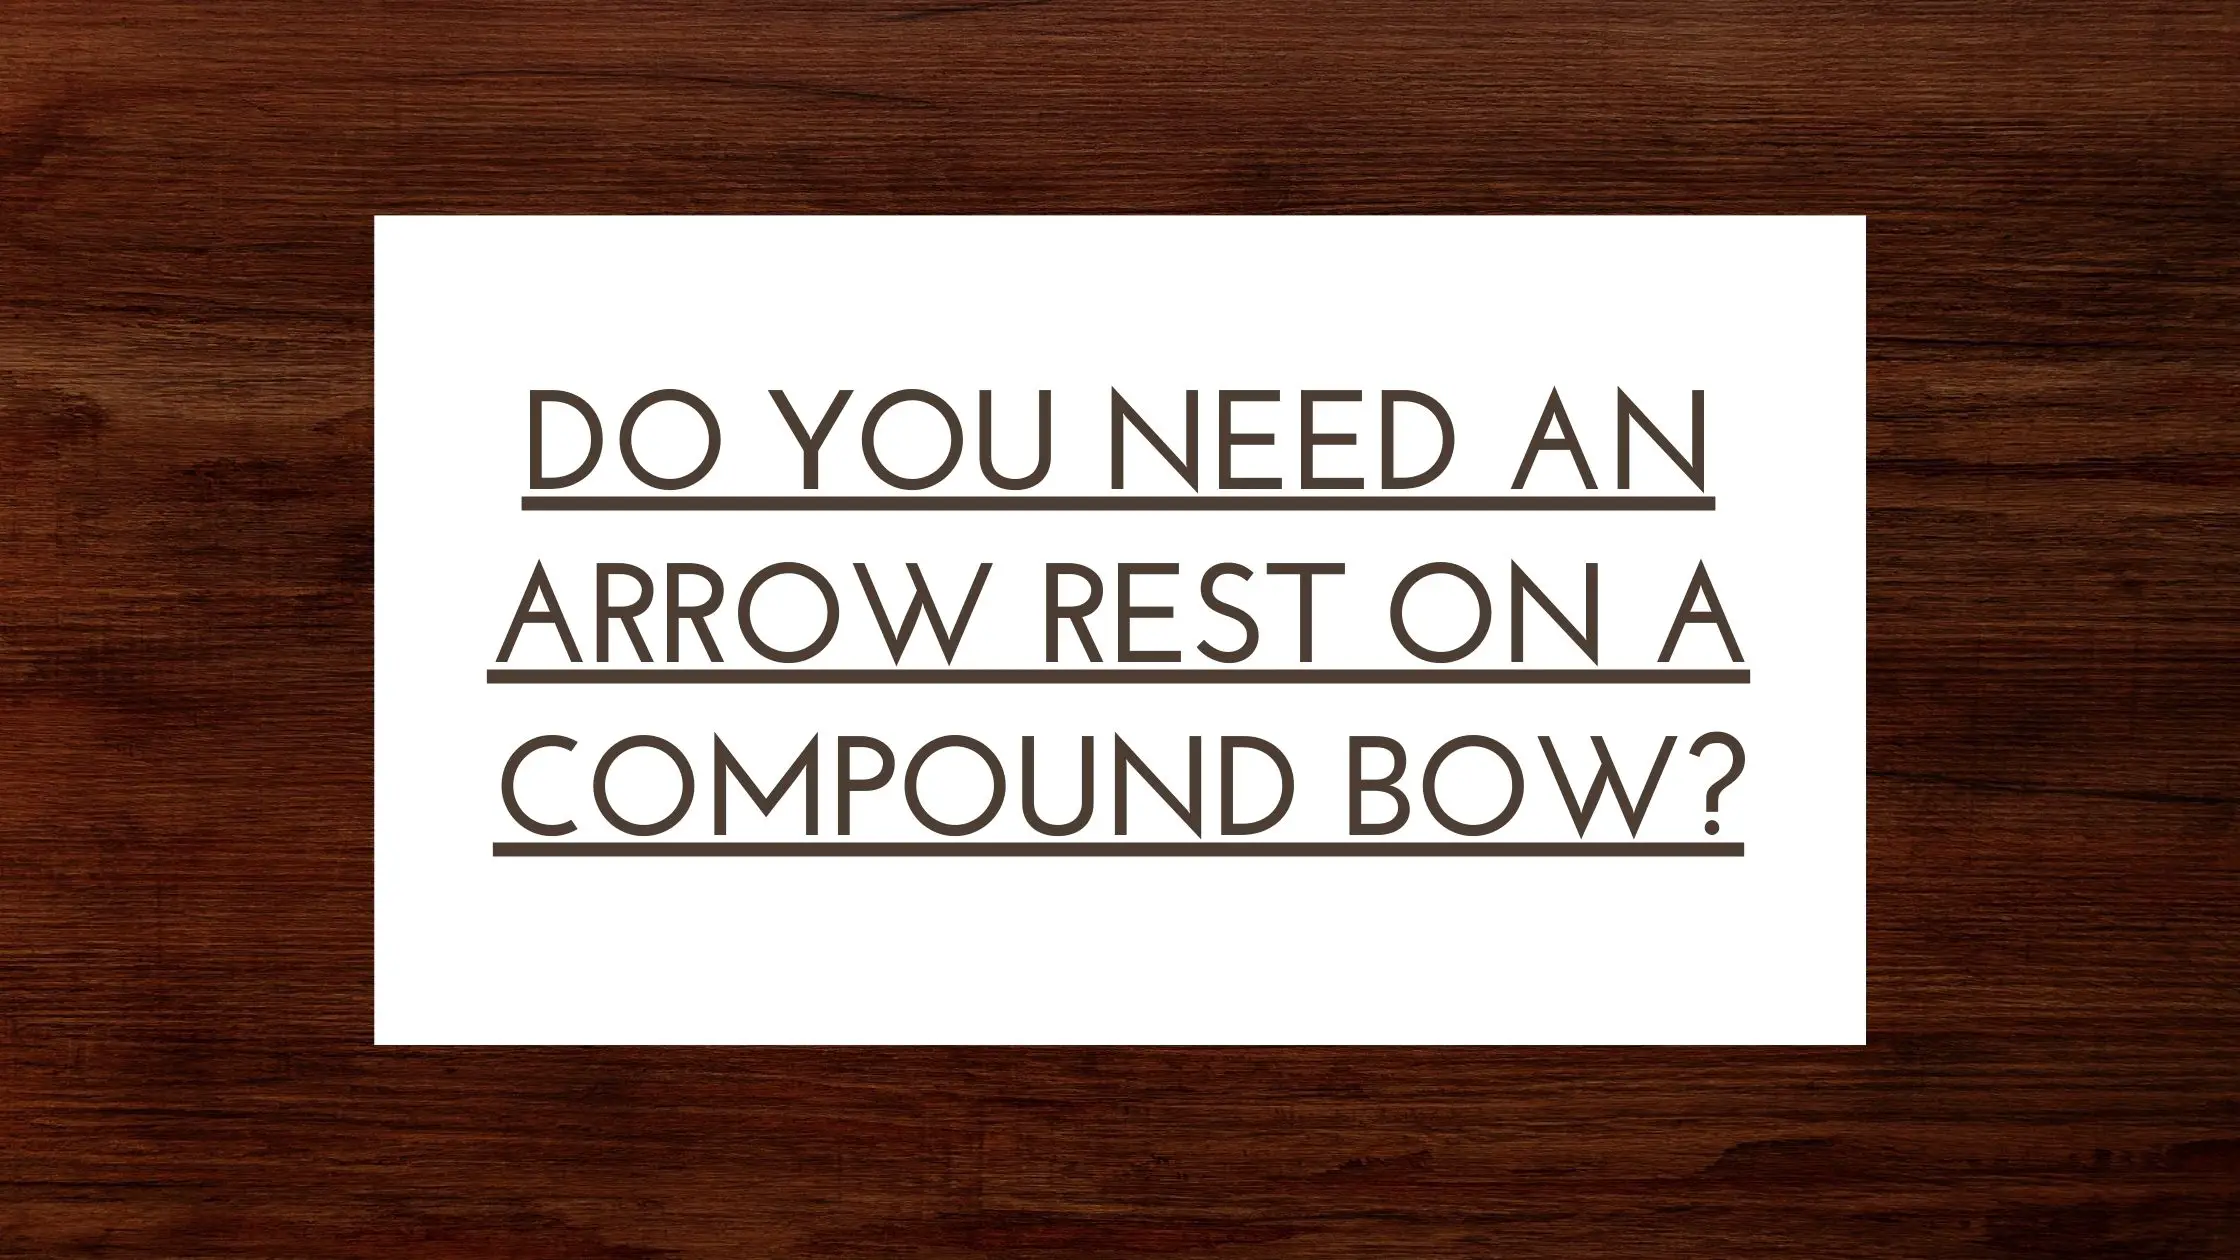 Do You Need an Arrow Rest on a Compound Bow